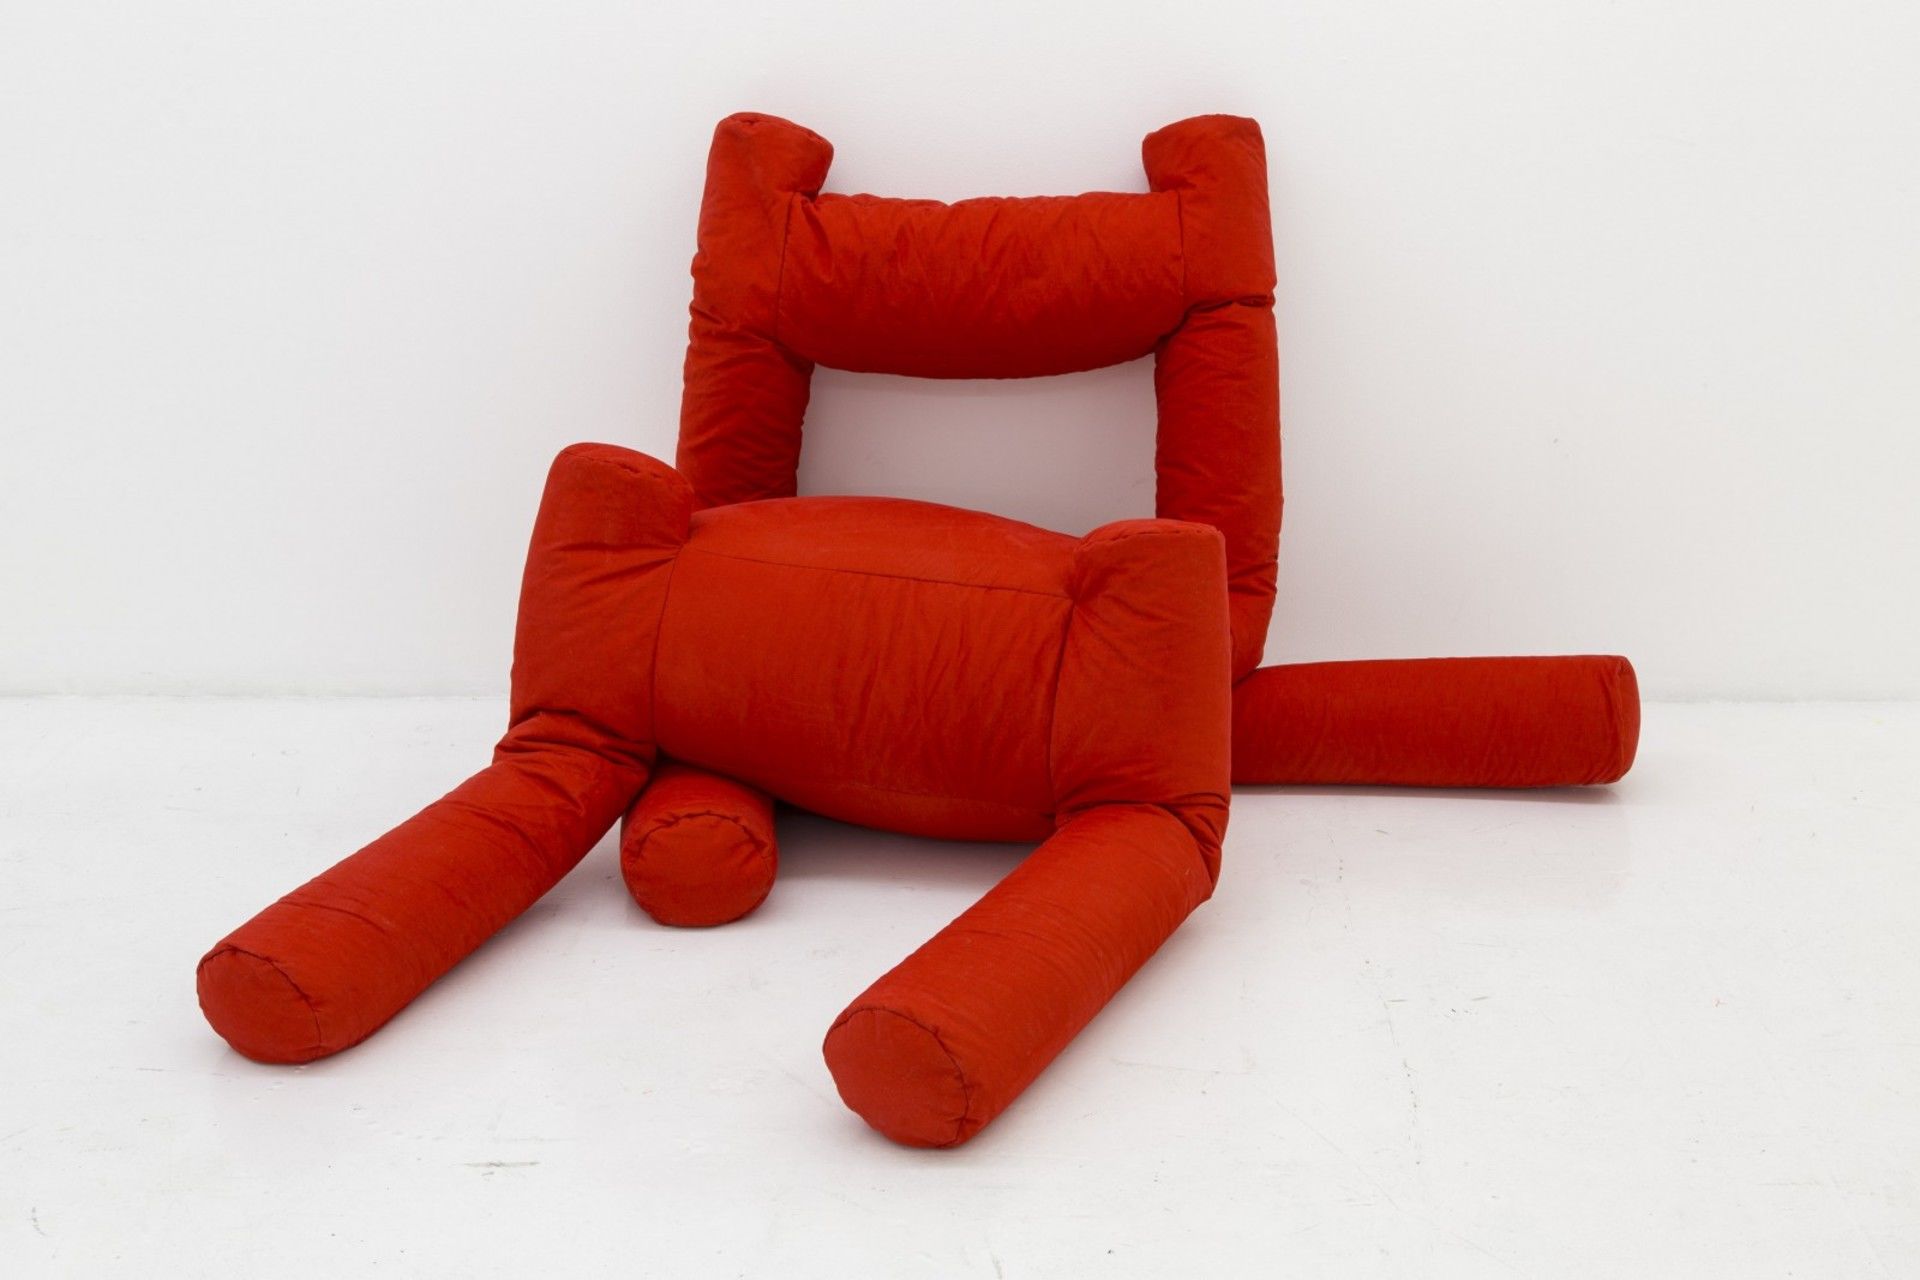 Bean Bag Chair by Katie Stout for exhibition Docile/Domicile/Dandy at Gallery Diet, Miami 2015